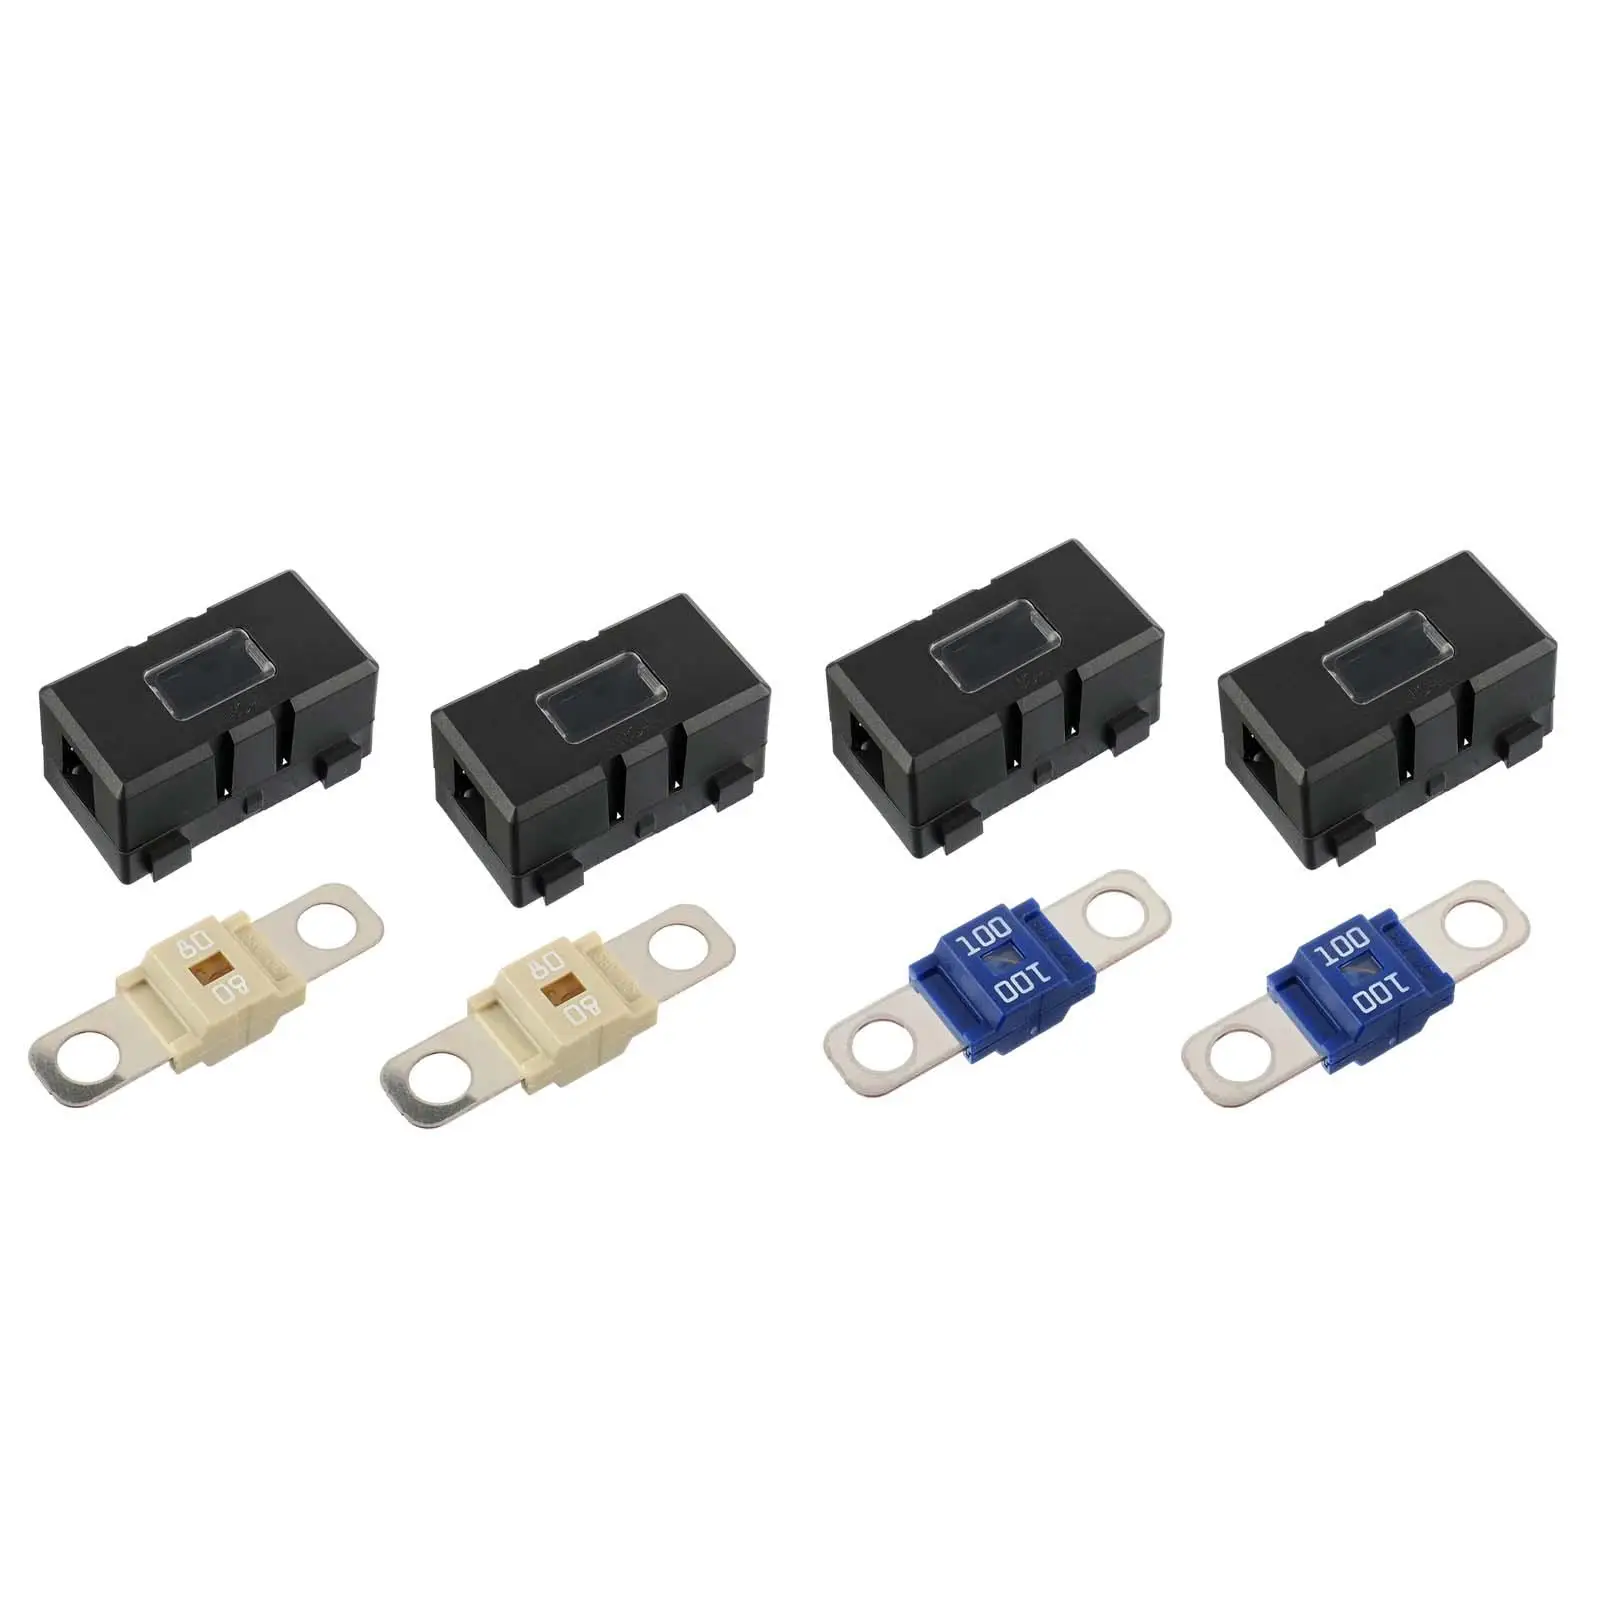 Durable Car Fuse Holder Flame Retardant Dampproof Circuit Protection Multifunctional Fuse block for Caravans Vehicles